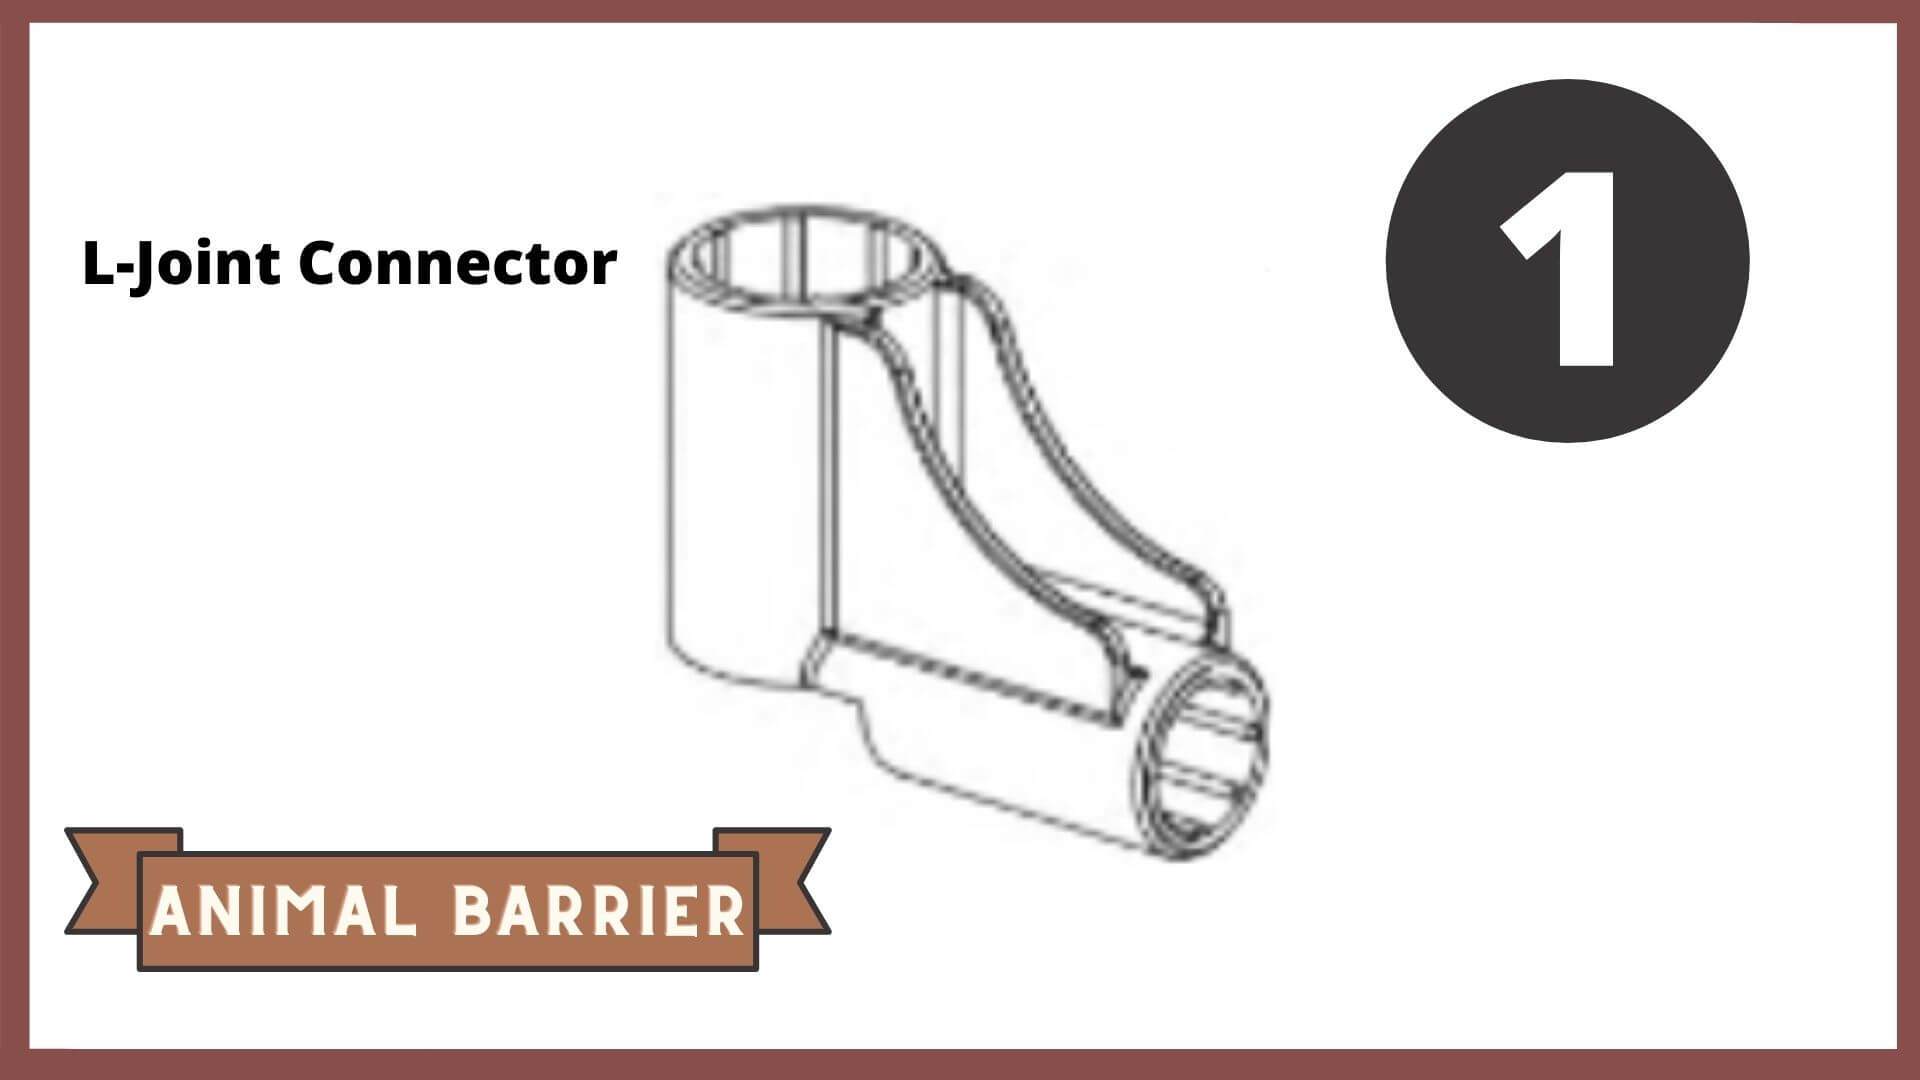 REPLACEMENT PARTS for: Stack & Extend Animal Barrier Kits & Gardens Accessories Frame It All Part #1 - L-Connector 